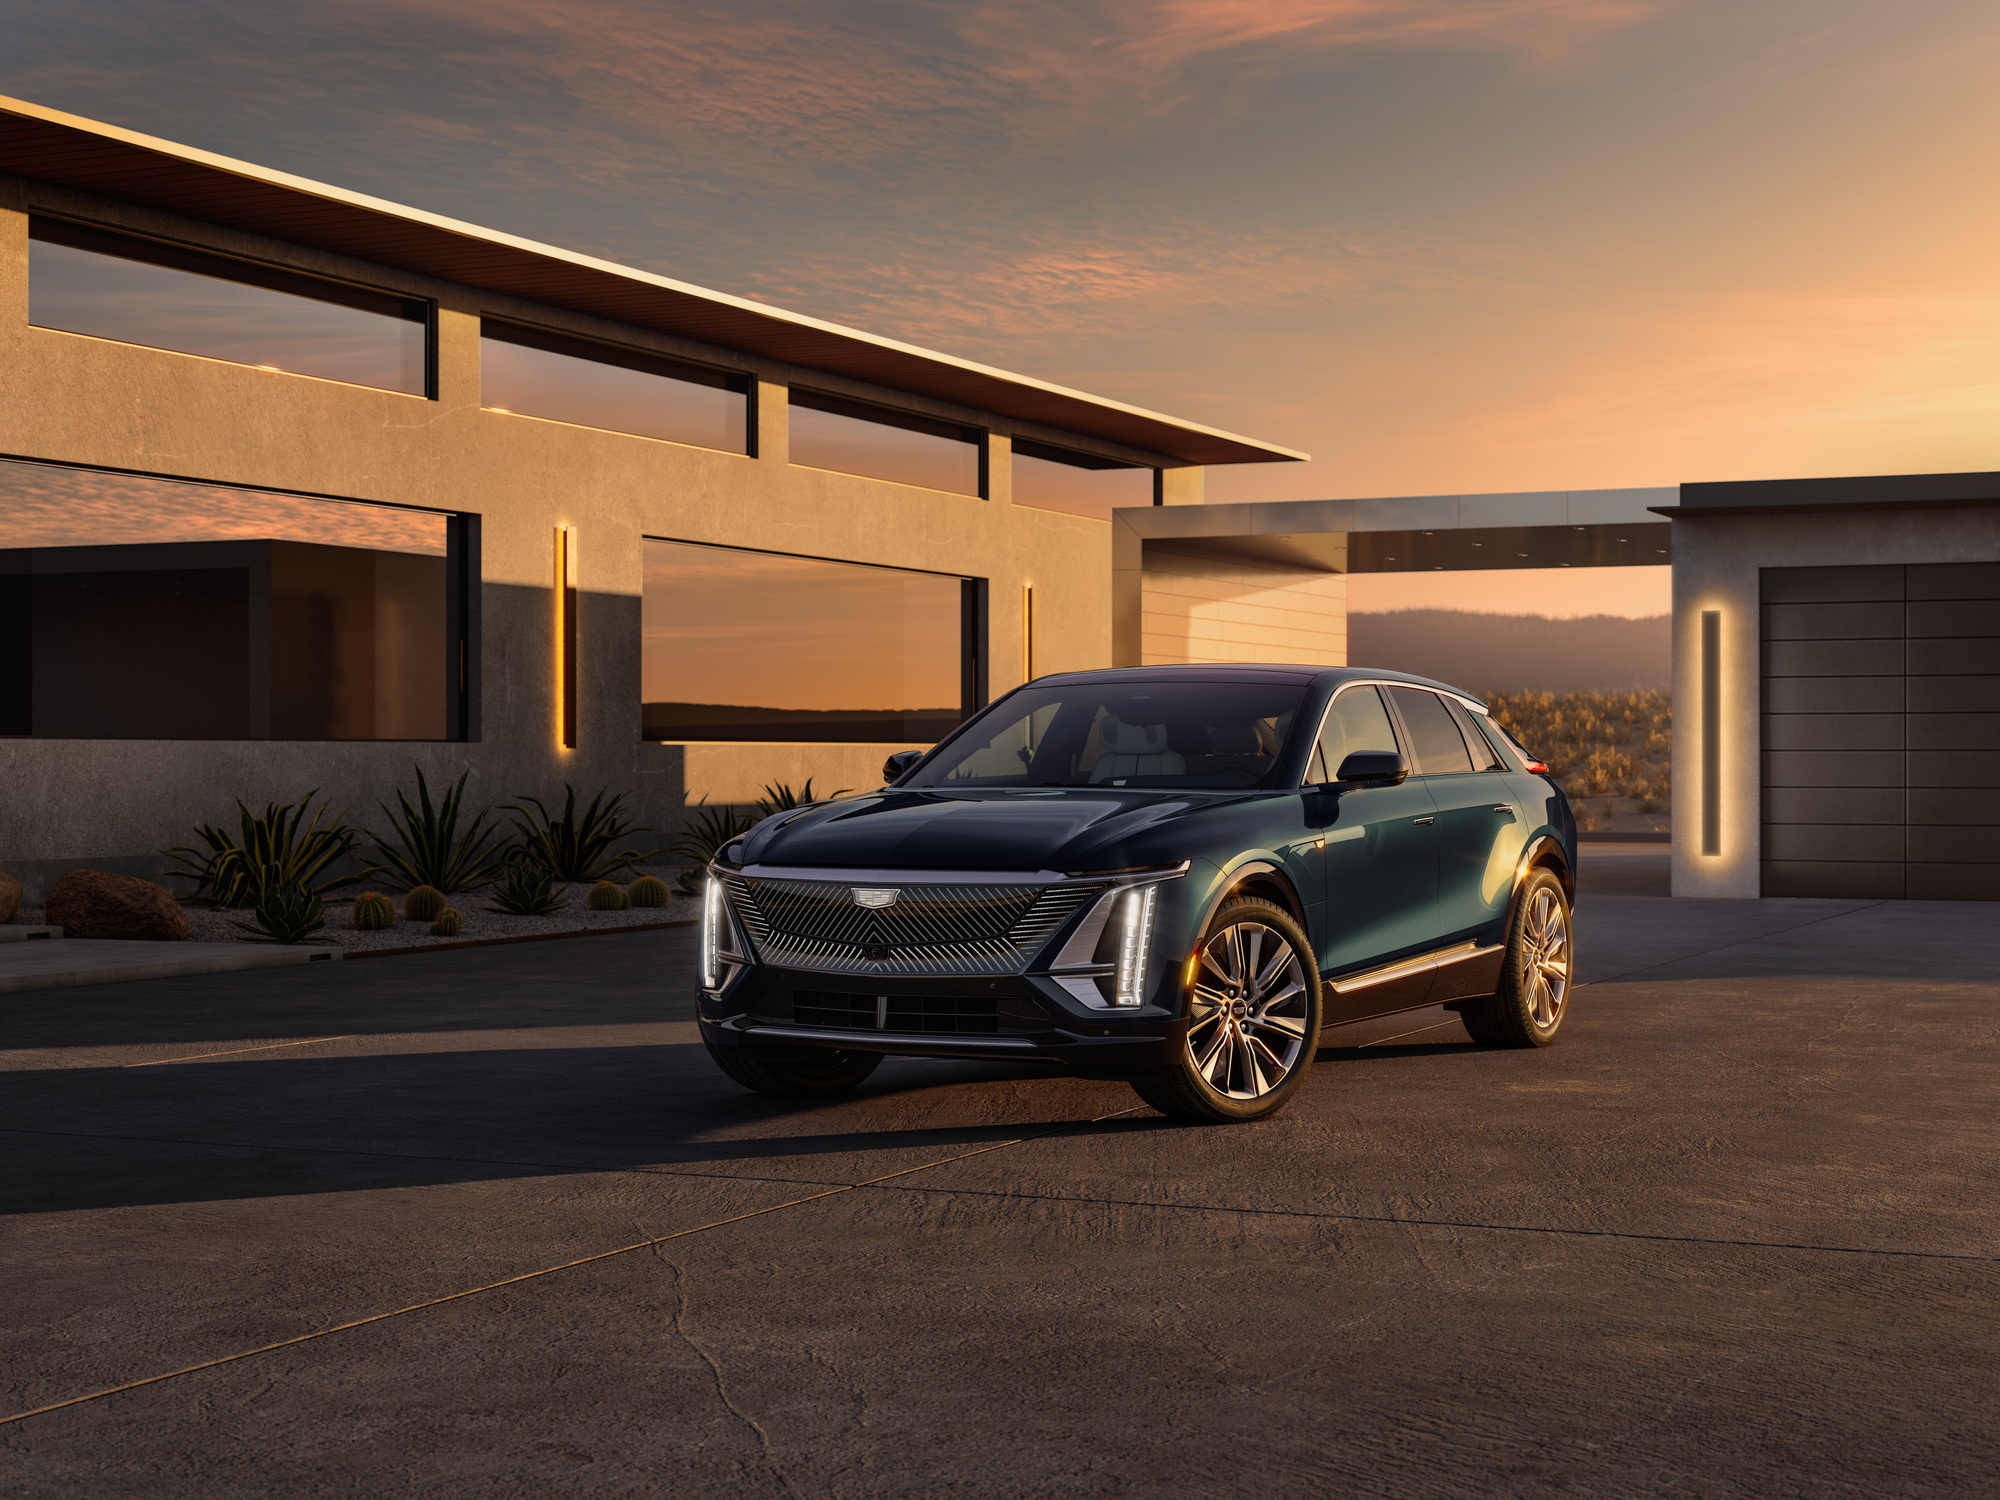 GM (NYSE:GM) Keeps Its Rise Going With New Electric Cadillac